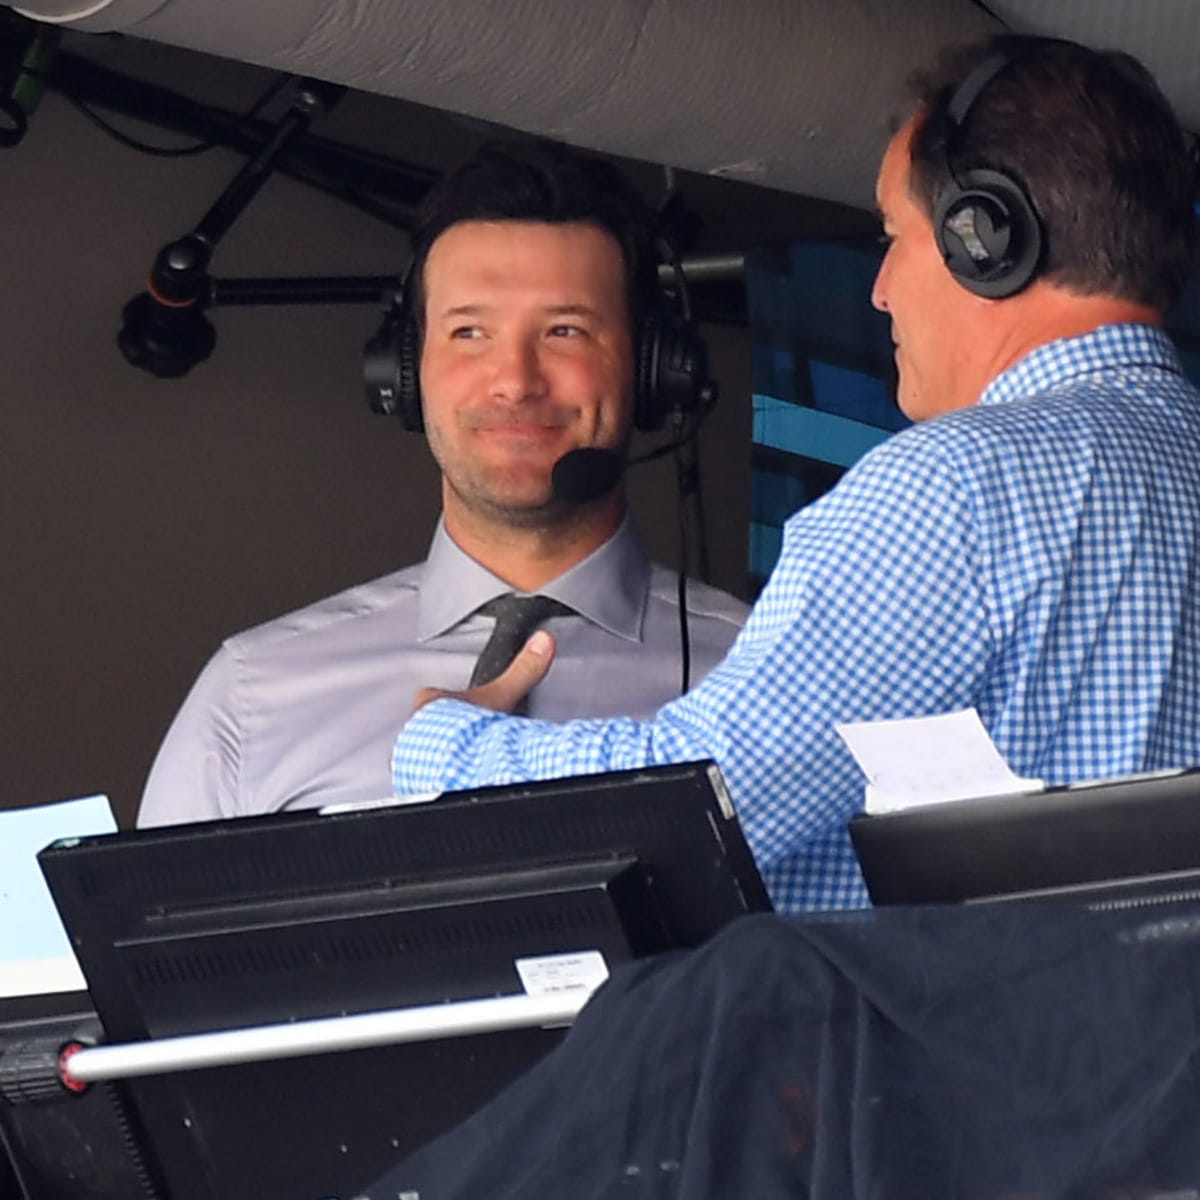 ESPN offering Tony Romo record-setting deal to leave CBS